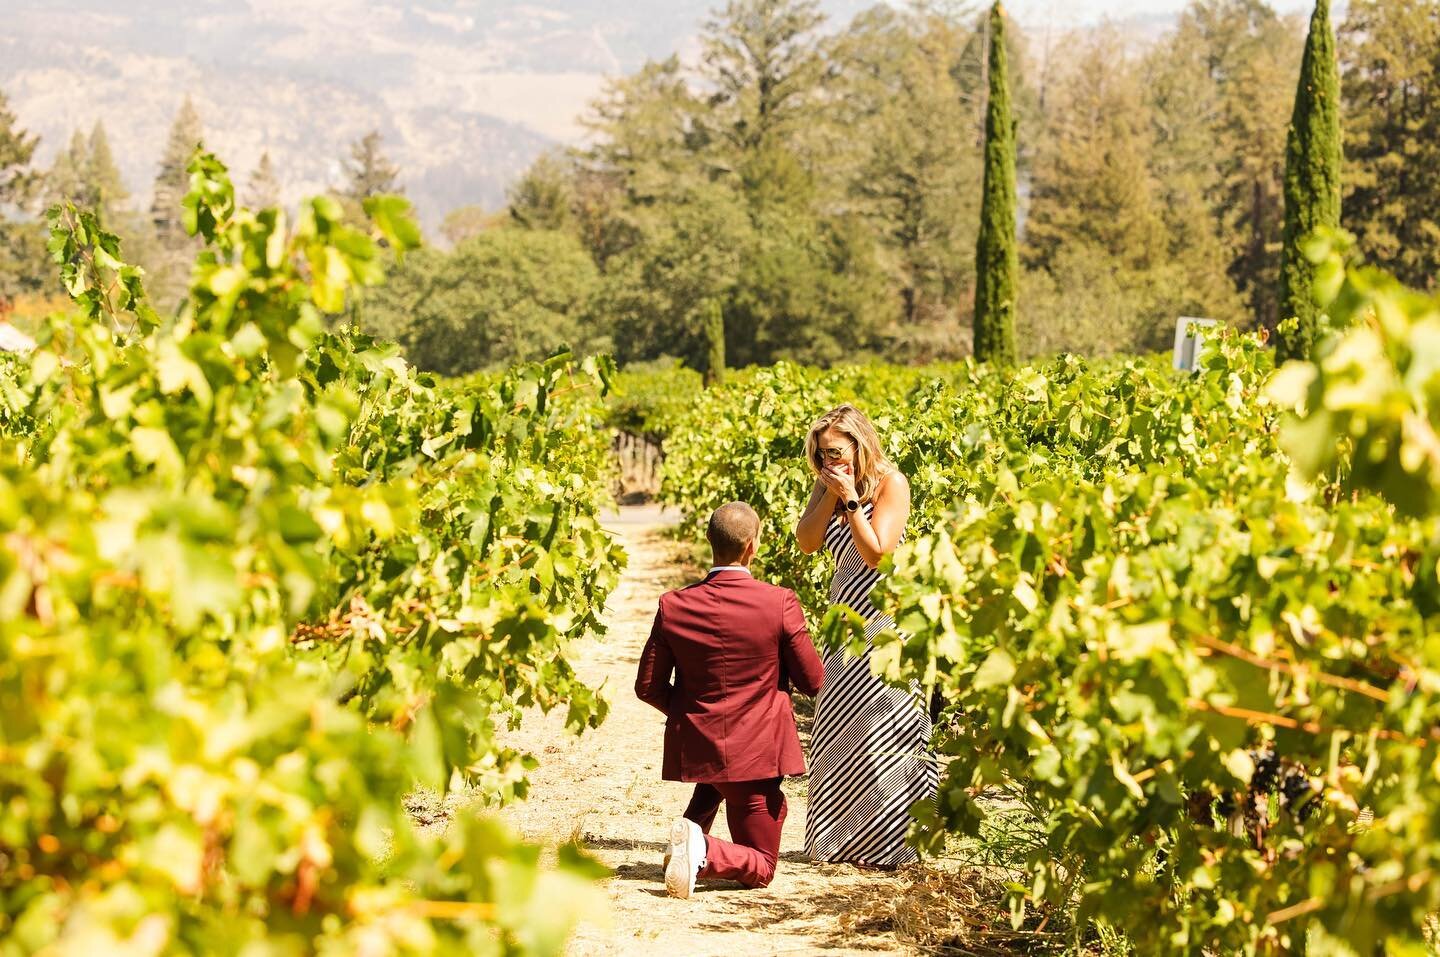 Don&rsquo;t mind me, just peeking behind vineyards, grabbing photos of this sweet couple! Congrats you two- live up in Hawaii!